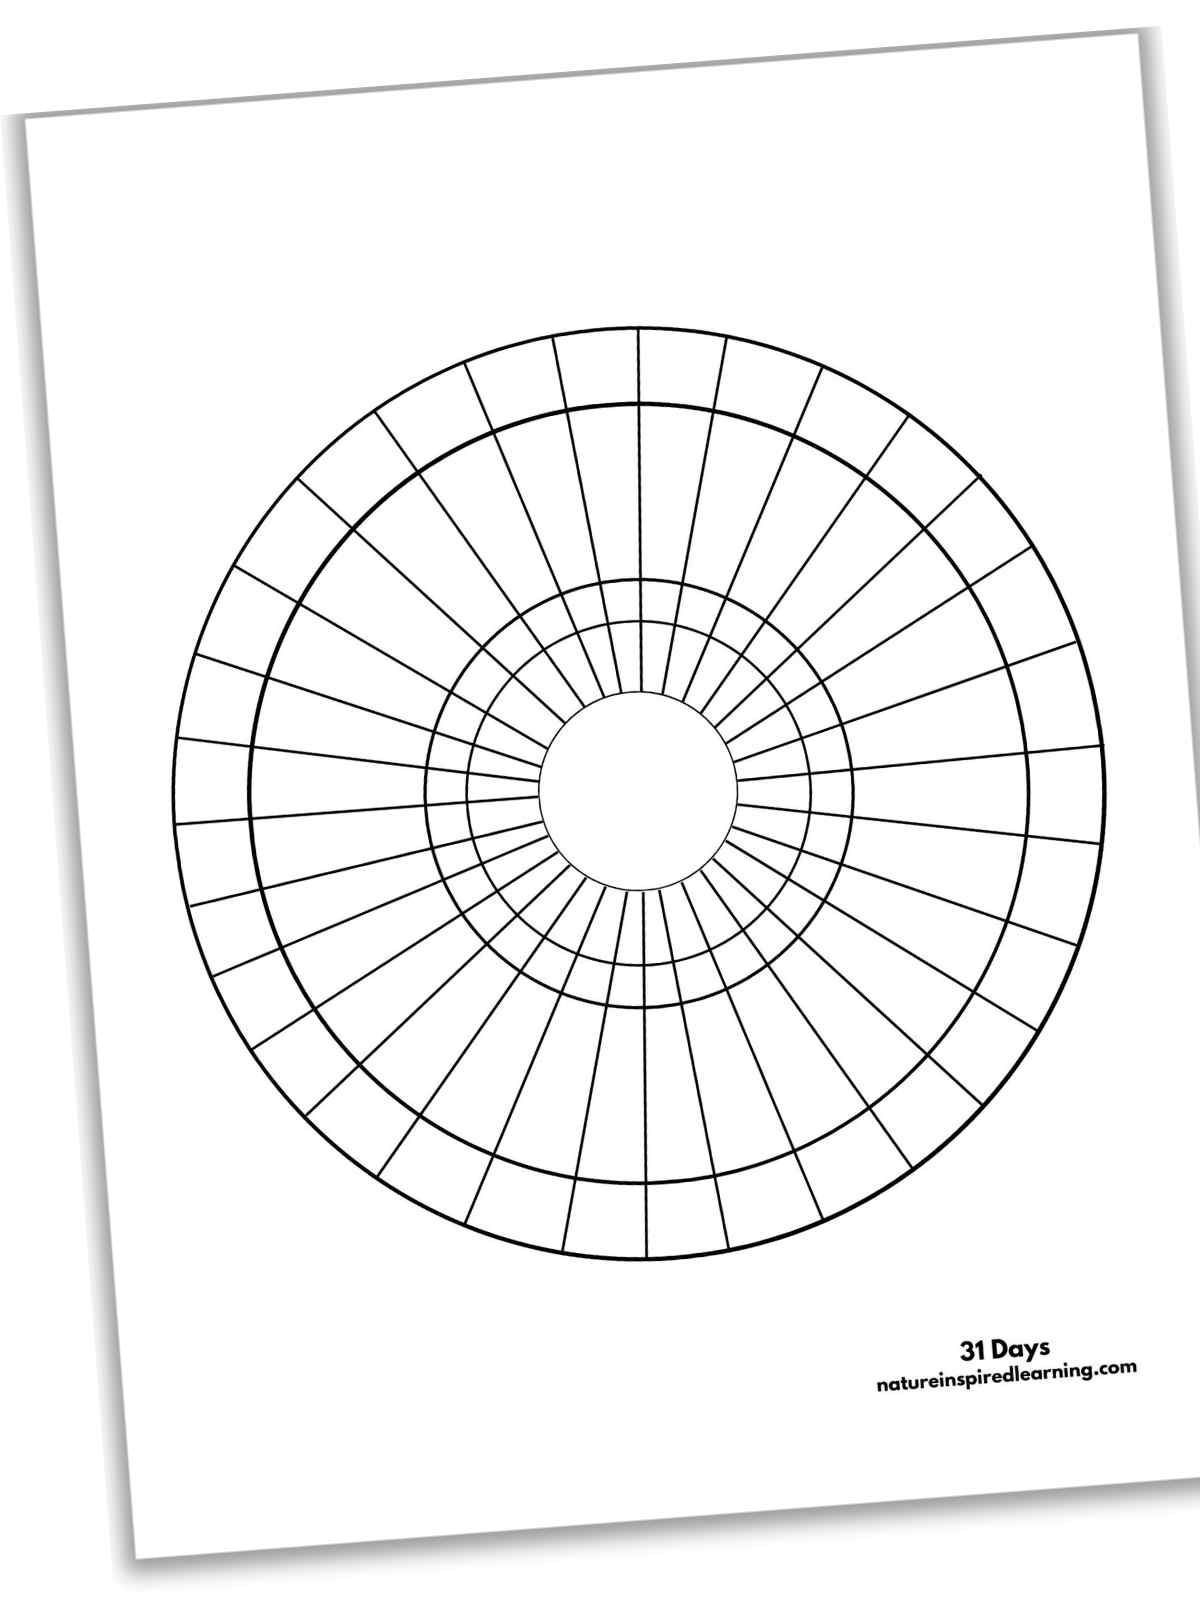 31 day circle calendar template done in black and white slanted